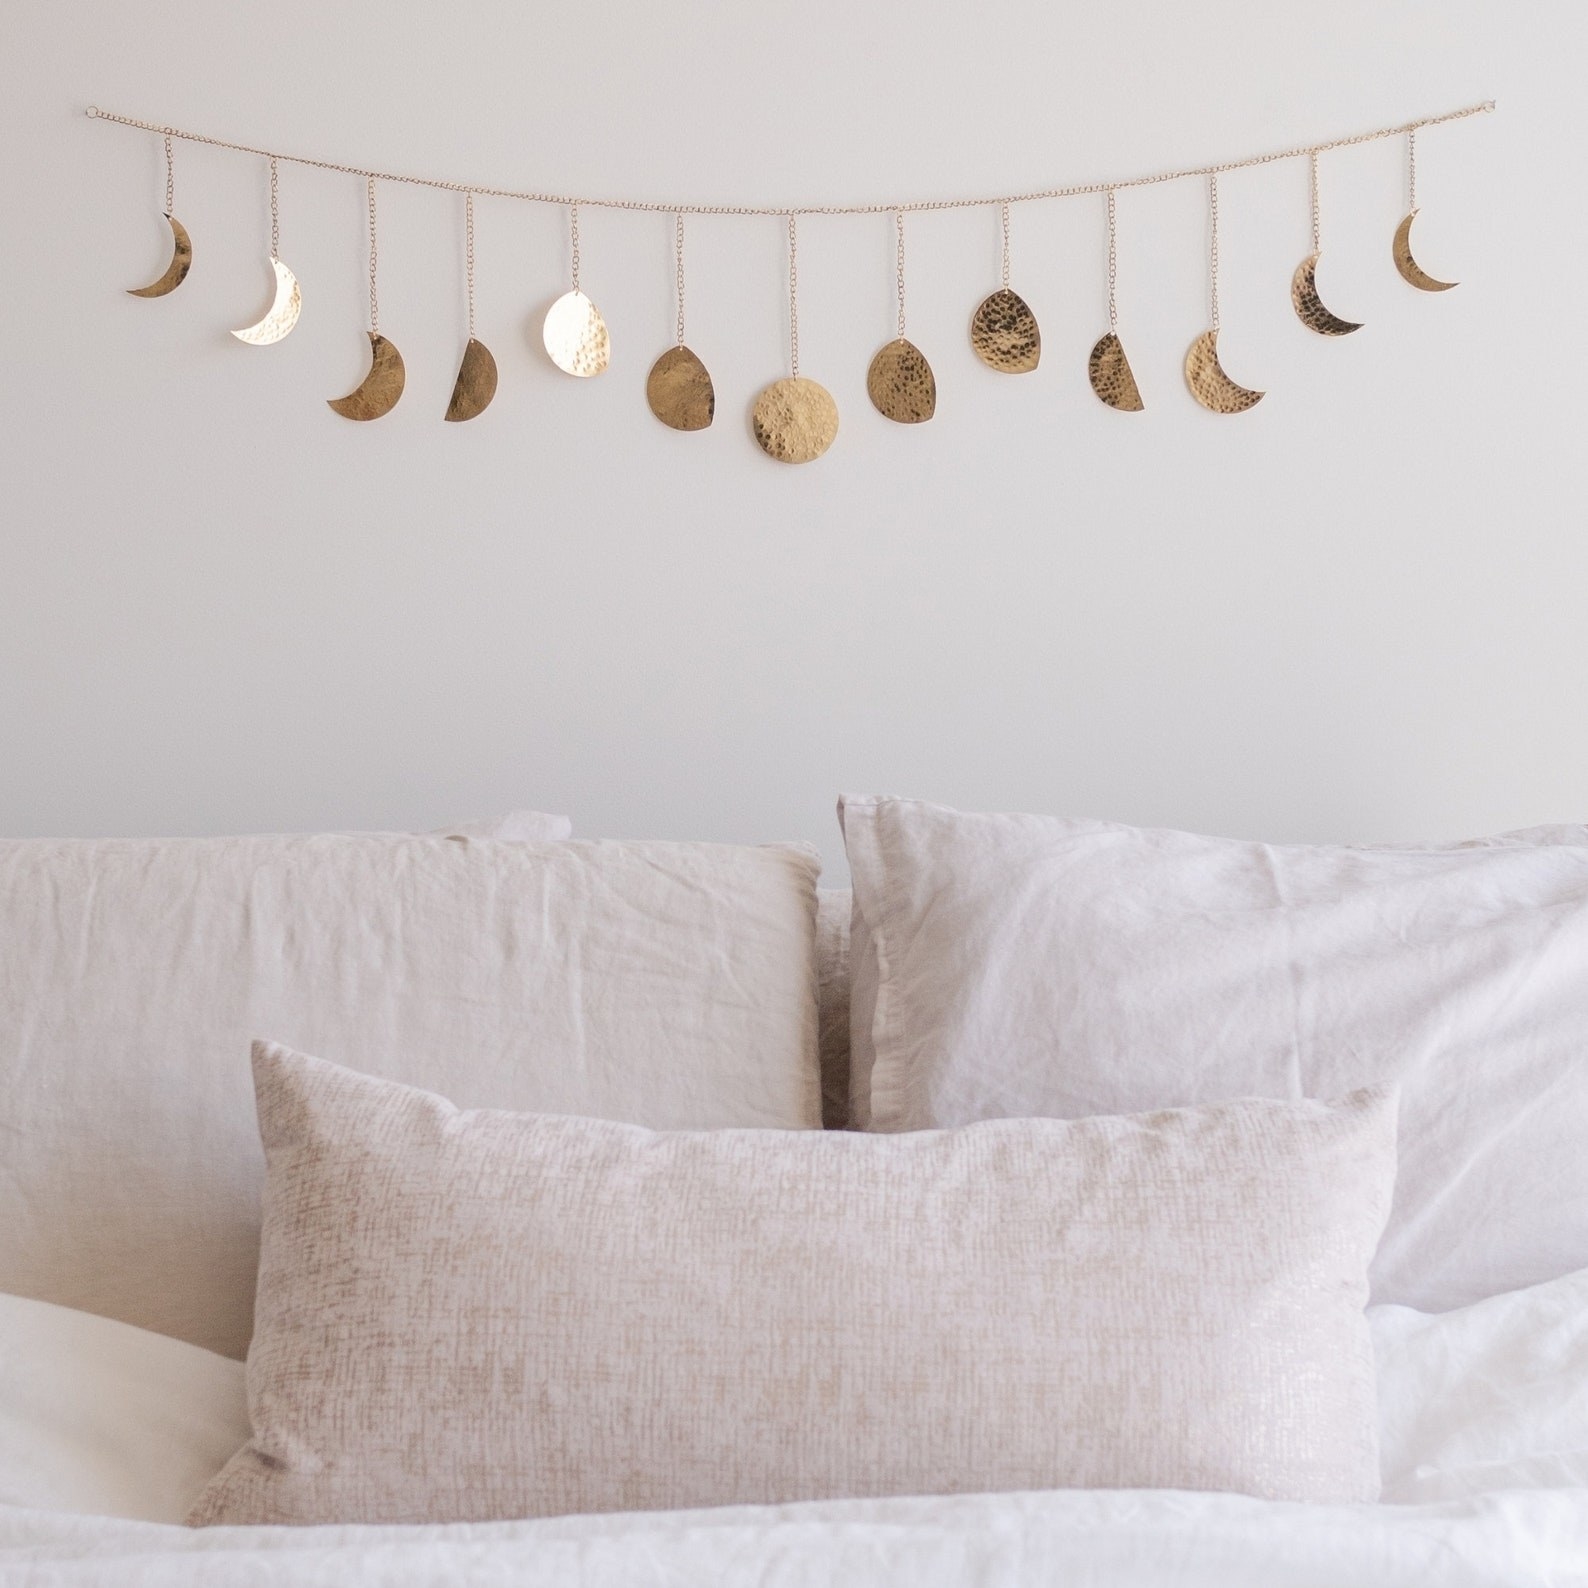 the gold moon phase garland hung above a bed